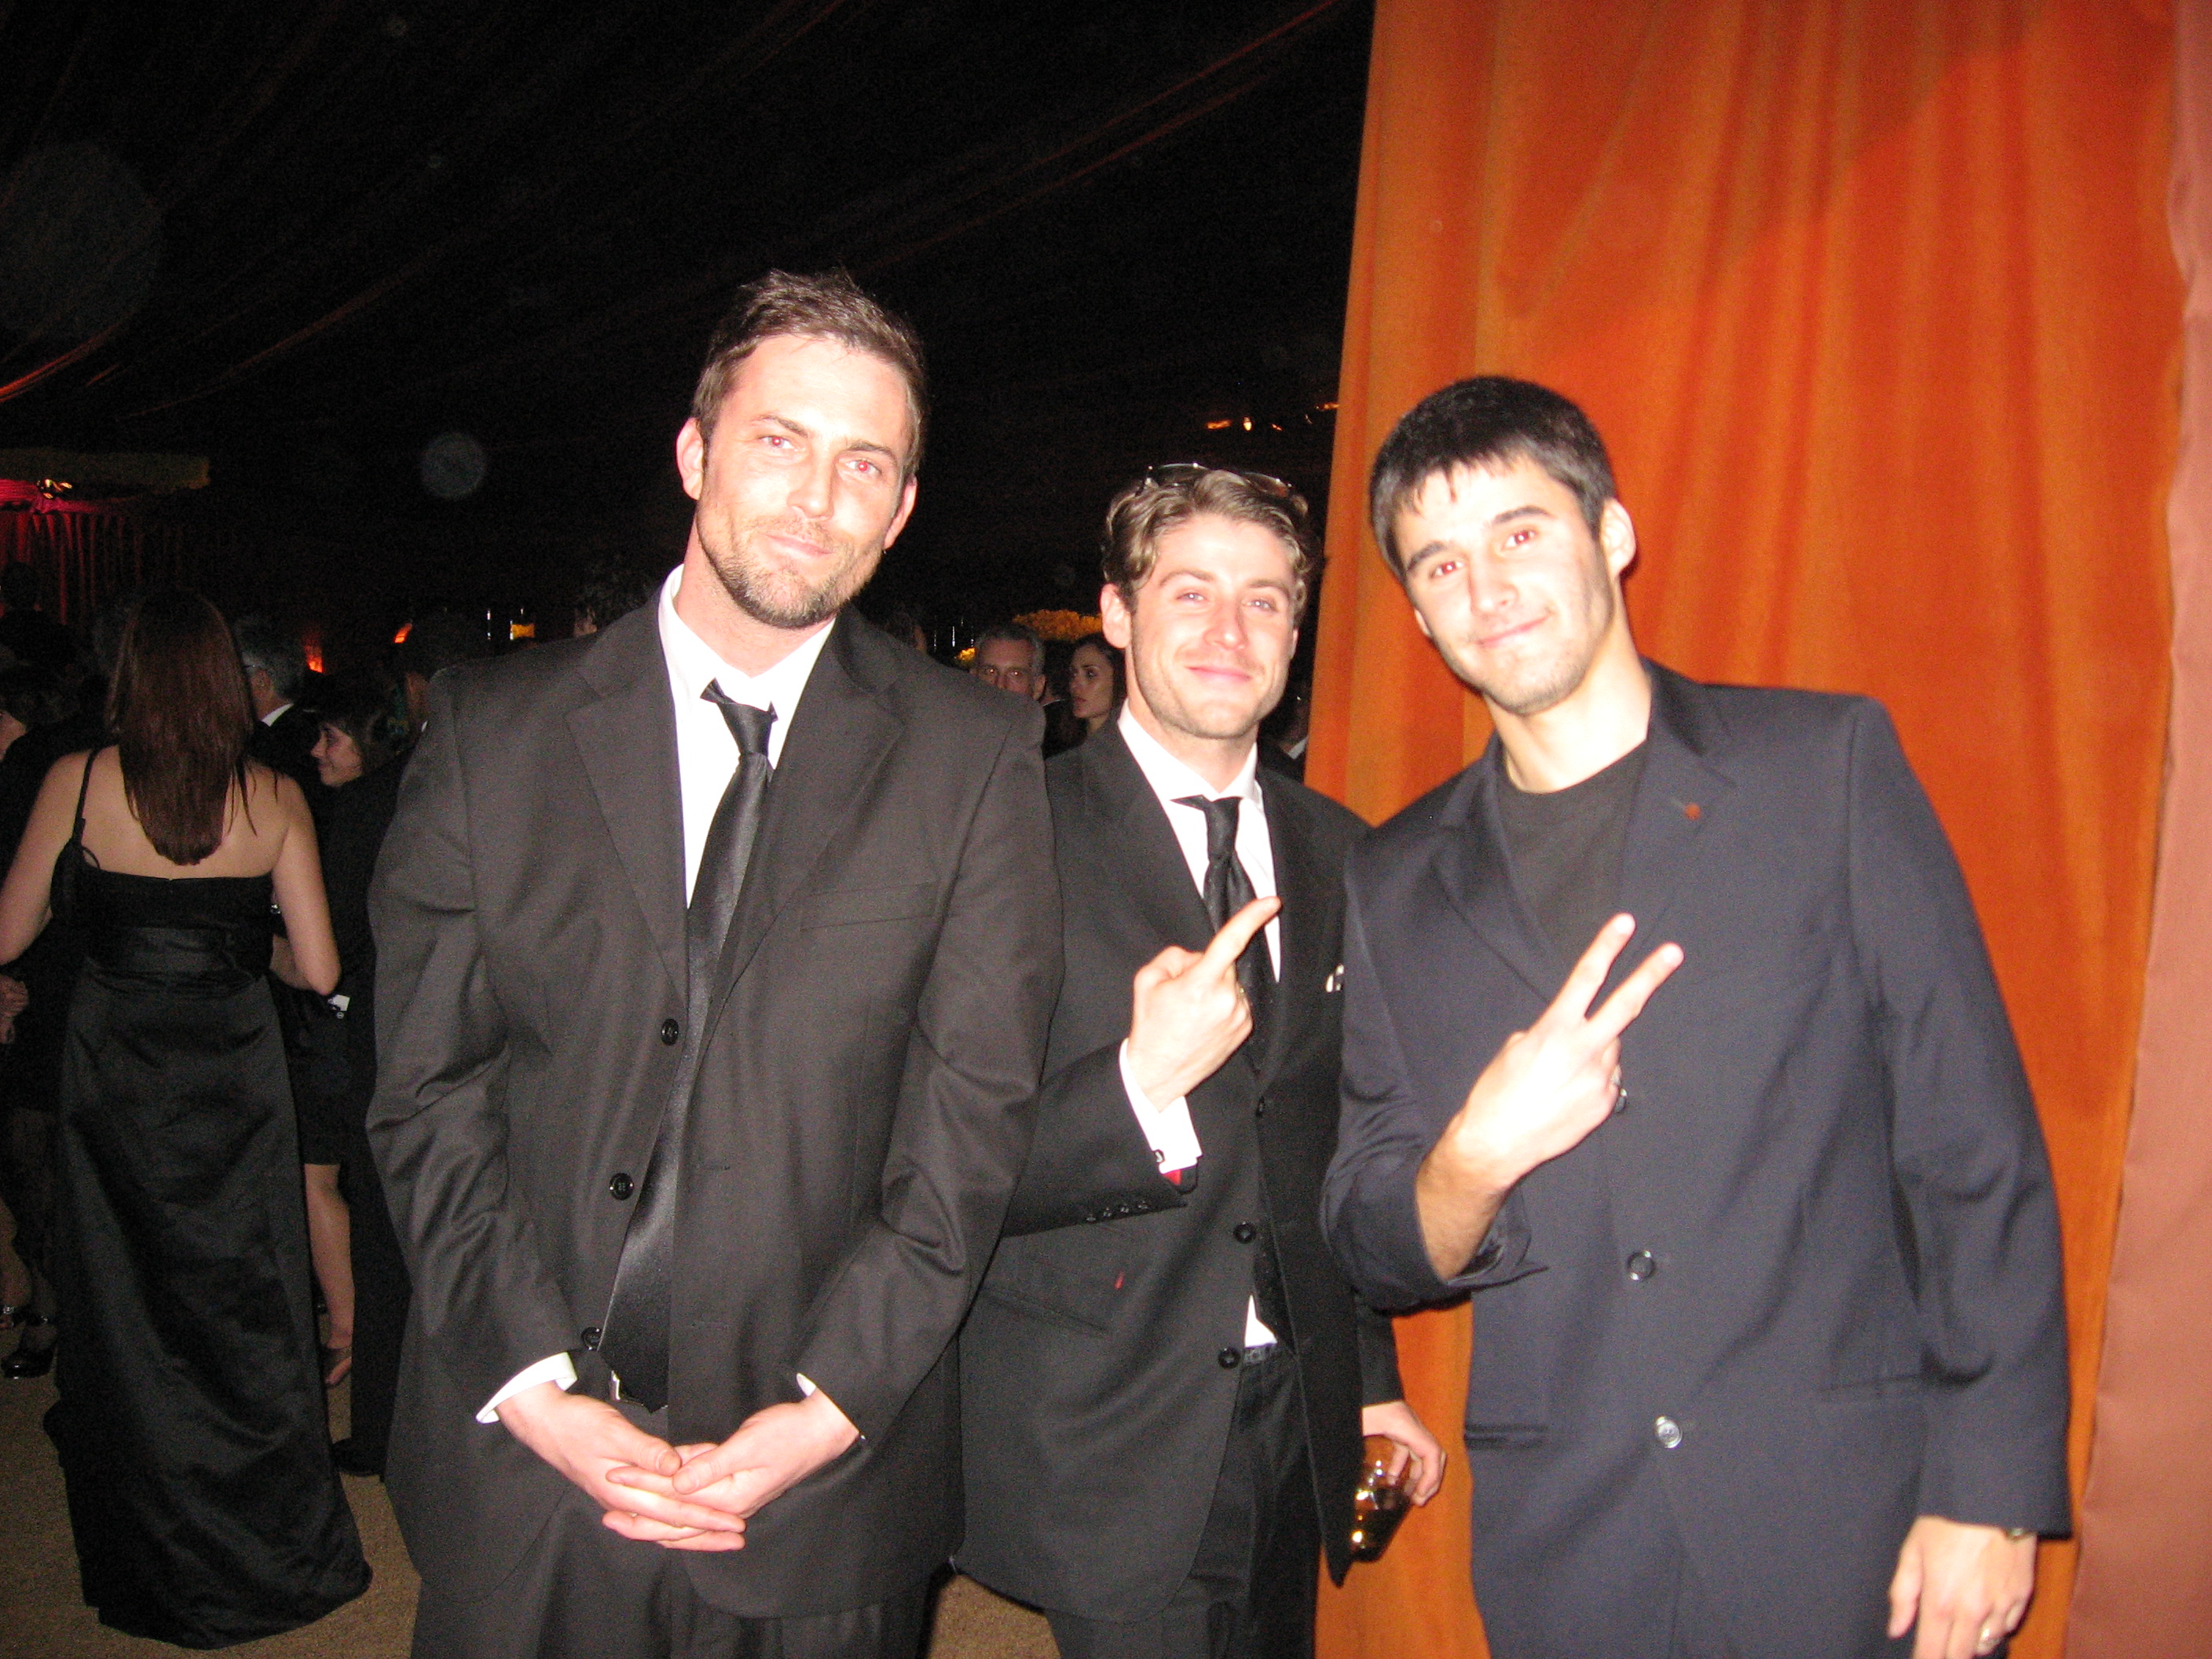 (L-R) Actors Chris Flynn, Jon Abrahams and producer Josh Wood attend the 15th Annual Screen Actors Guild Awards cocktail party held at the Shrine Auditorium on January 25, 2009 in Los Angeles, California.